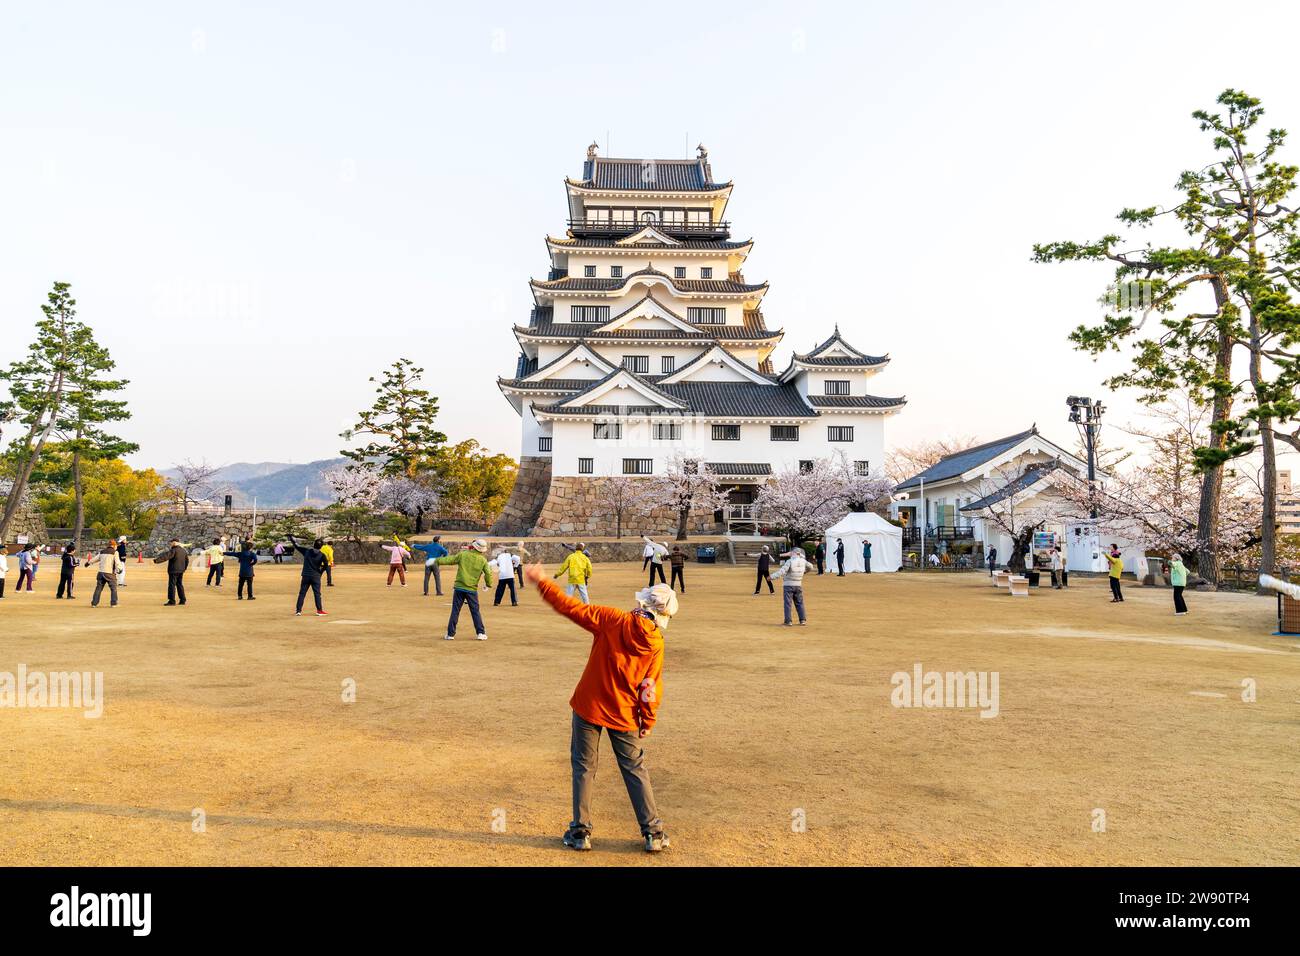 Fukuyama castle, Japan. Old people taking part in a group exercise session in front of the newly restored white borogata style keep just after sunrise Stock Photo